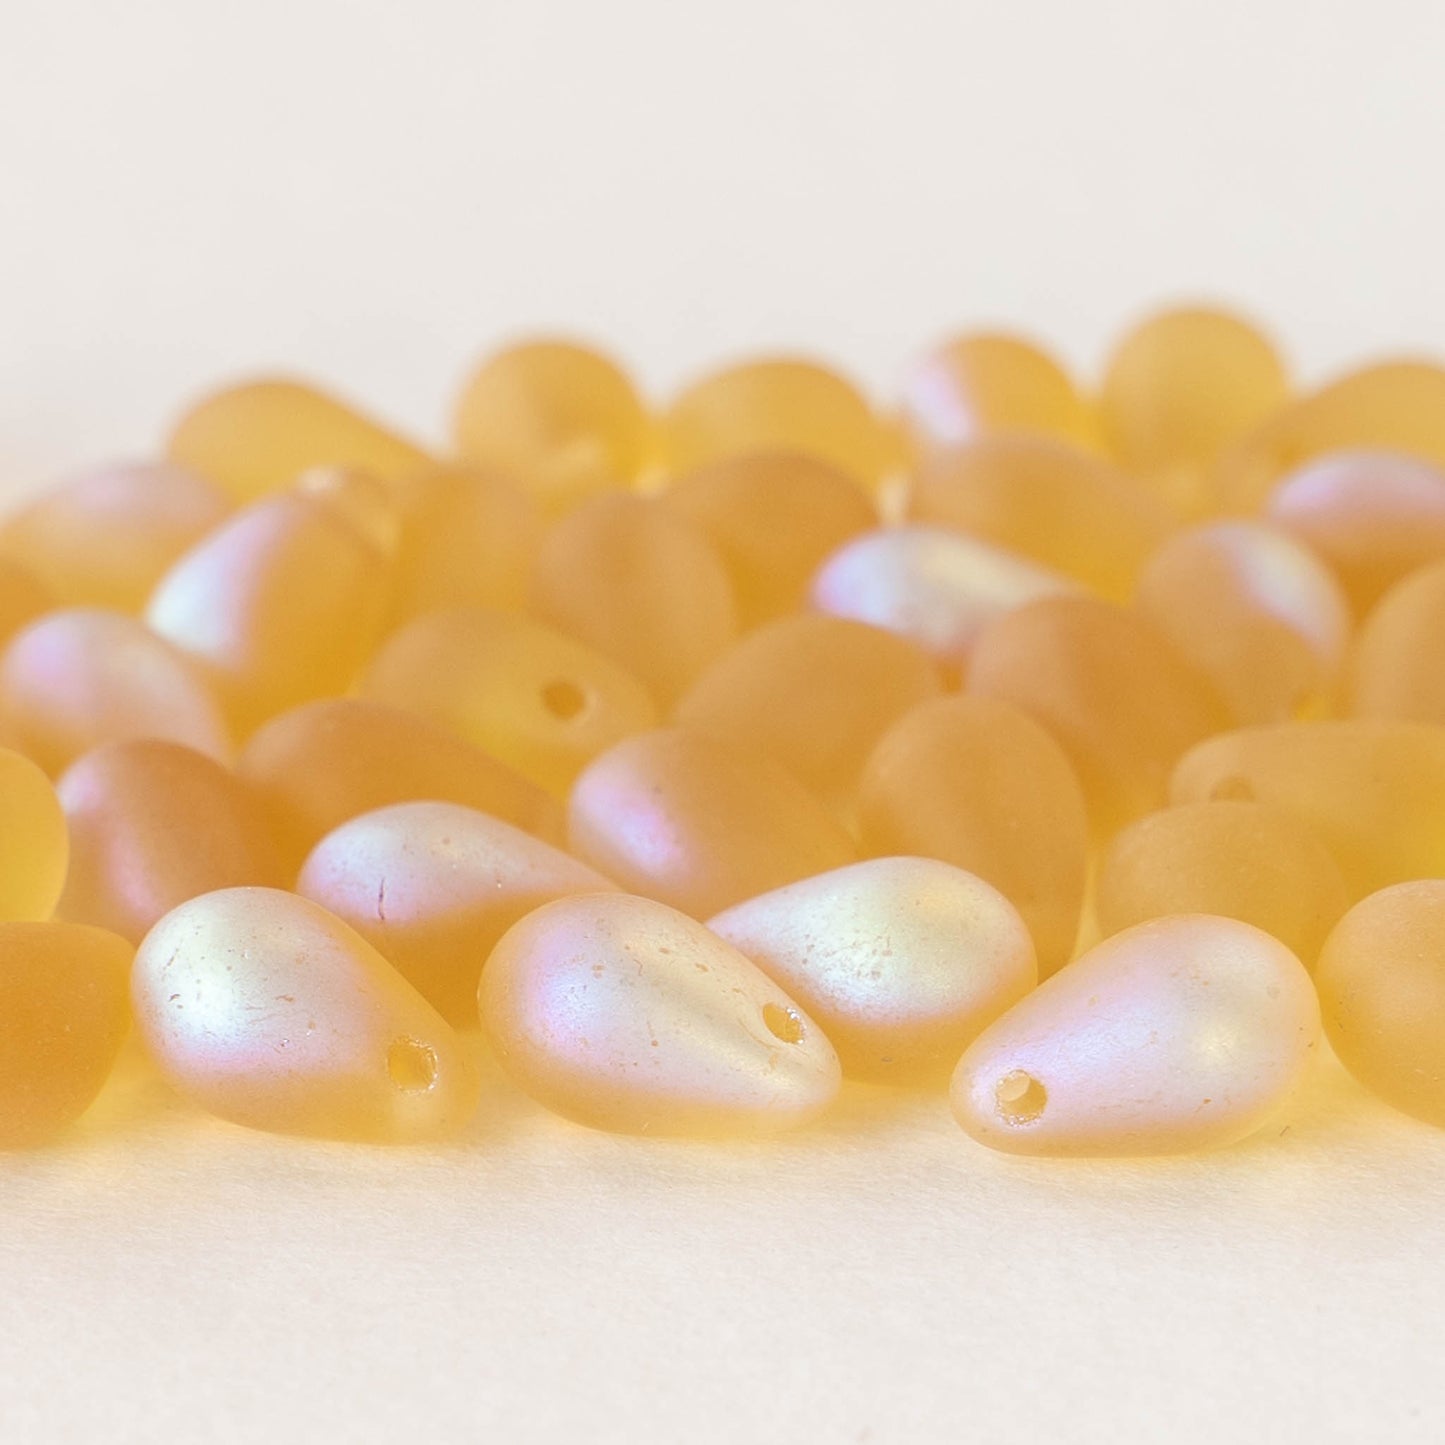 6x9mm Glass Teardrop Beads - Amber Matte with a Light AB Finish - 50 Beads